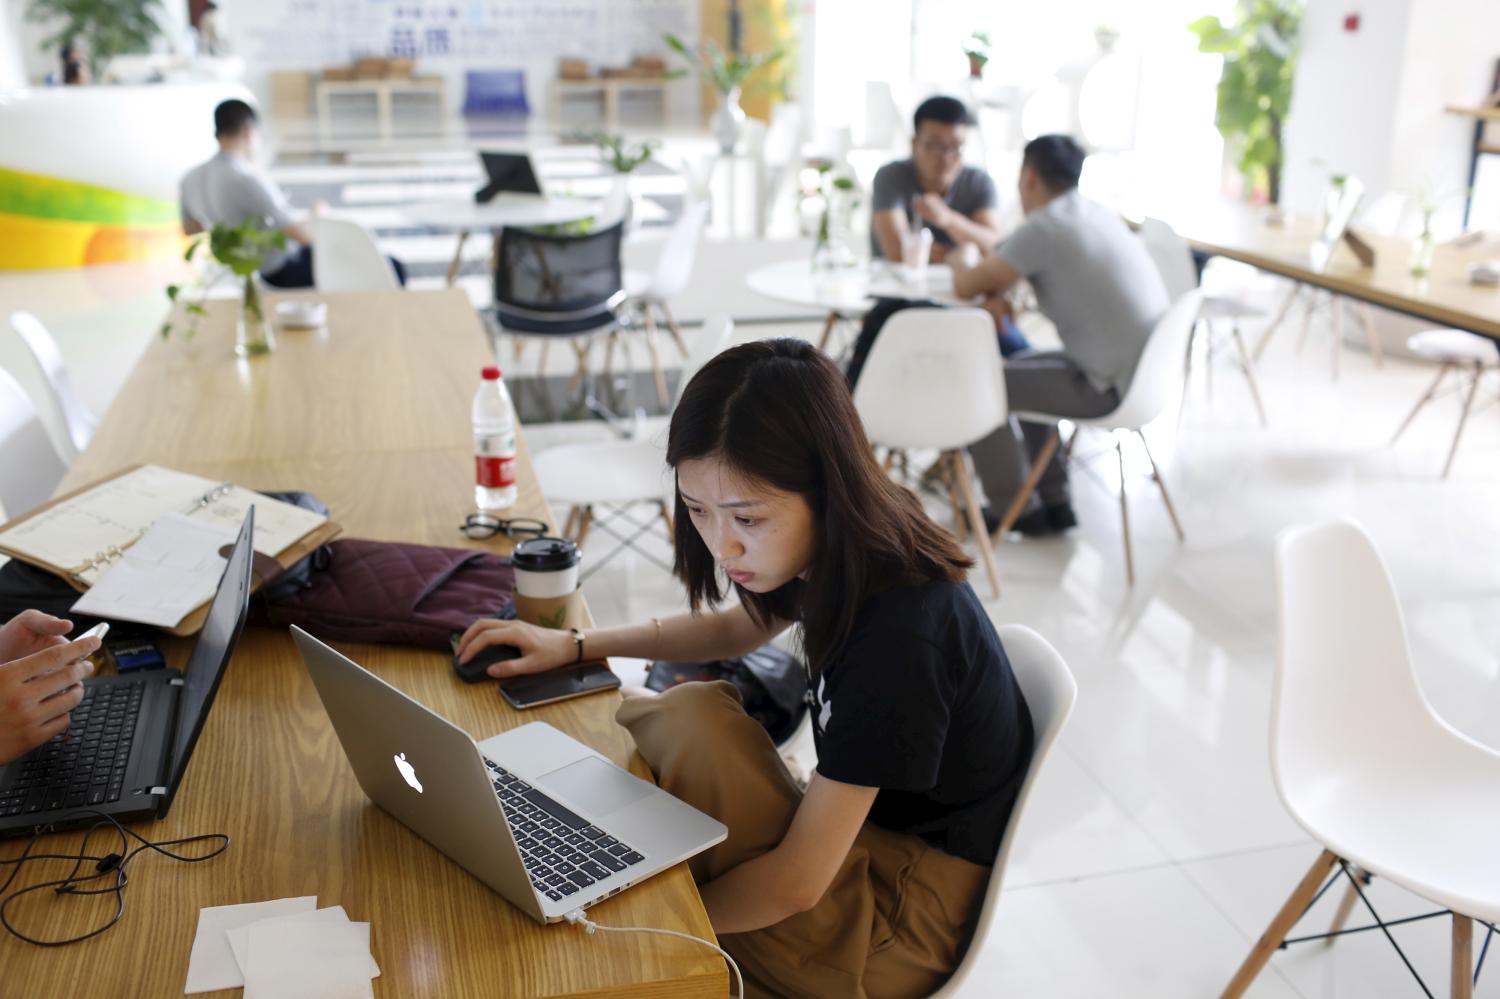 Young entrepreneurs look at their computers at a resting area inside the University Students Venture Park, in Shanghai, China, July 29, 2015. The University Students Venture Park in northern Shanghai was designed as an incubator for college students considering a startup. The lobby is decked out in a sunny palette and garnished with inspiring slogans about creativity; outside a large sign reads "Dream Community". Picture taken July 29, 2015.  To match INSIGHT CHINA-ENTREPRENEURS/   REUTERS/Aly Song - GF10000241676